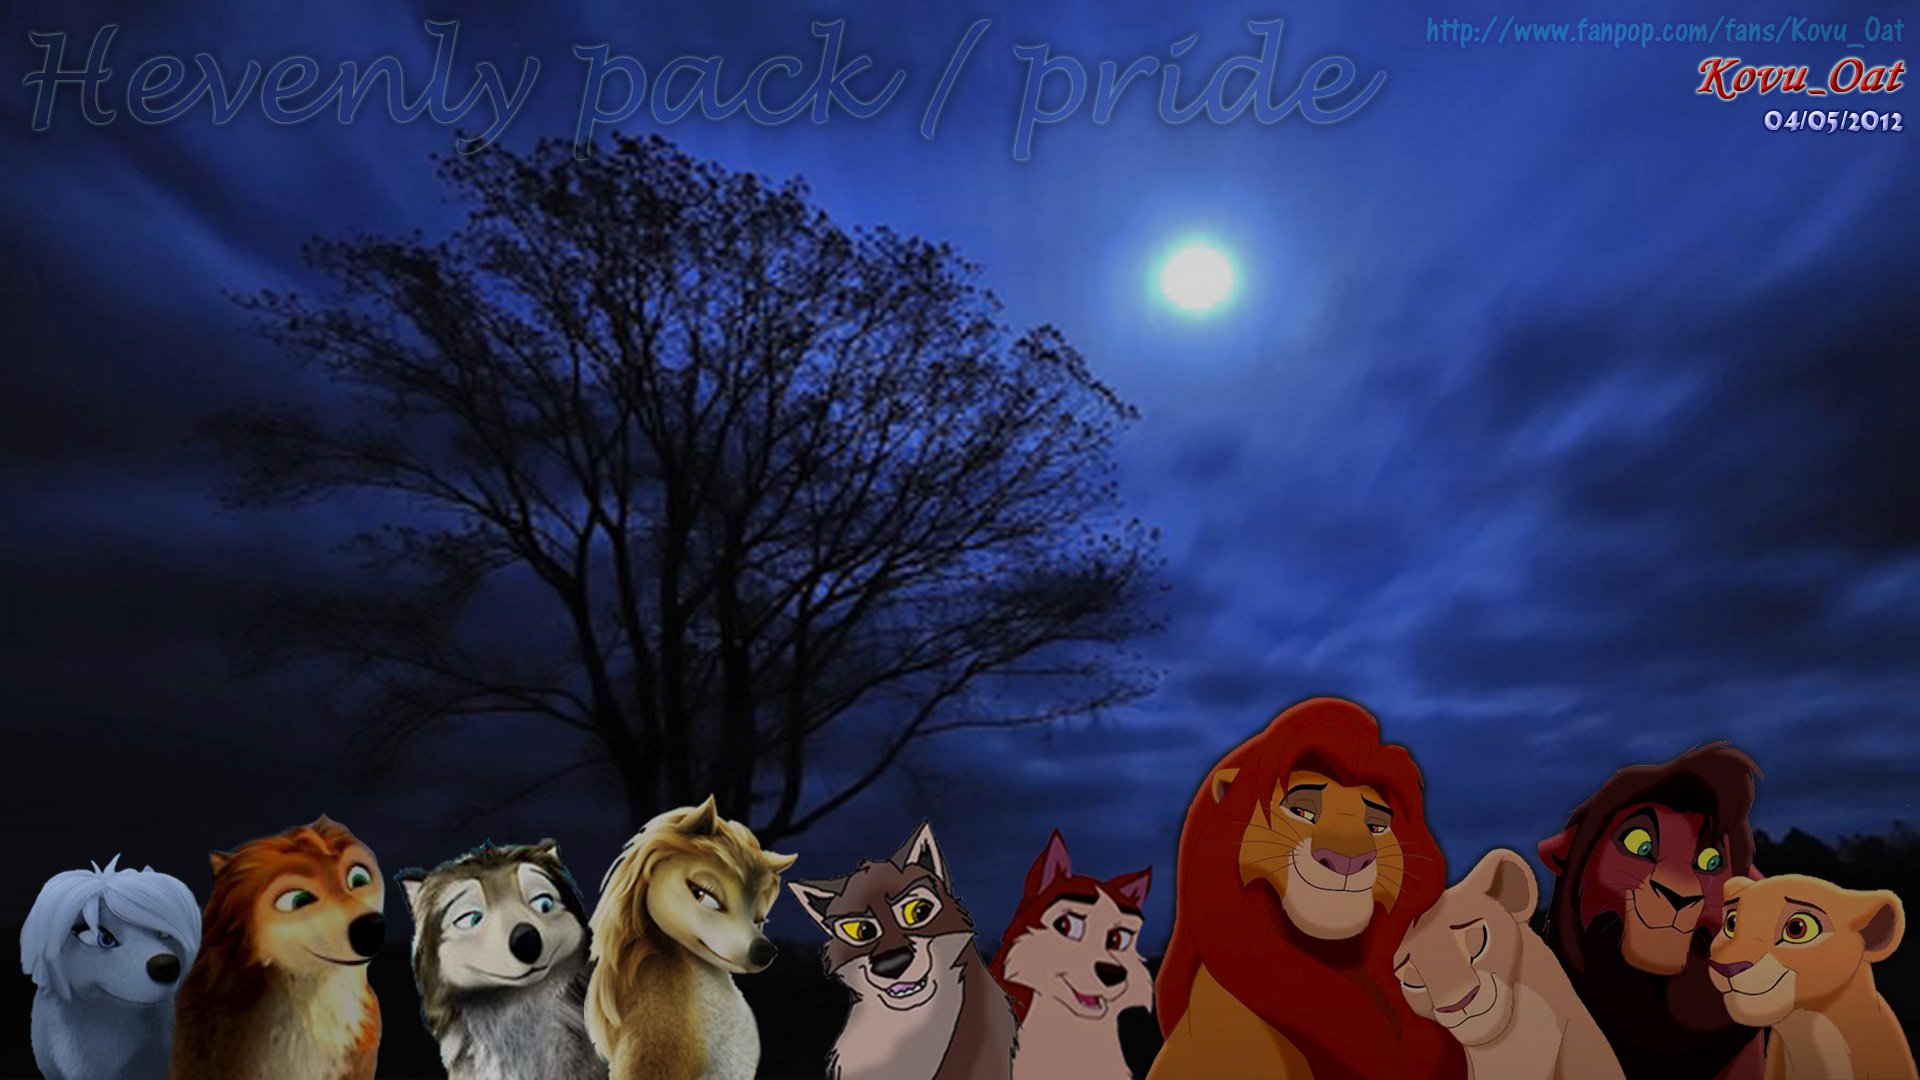 Pack And Pride Wolf Lion All Gather Together Hevenly